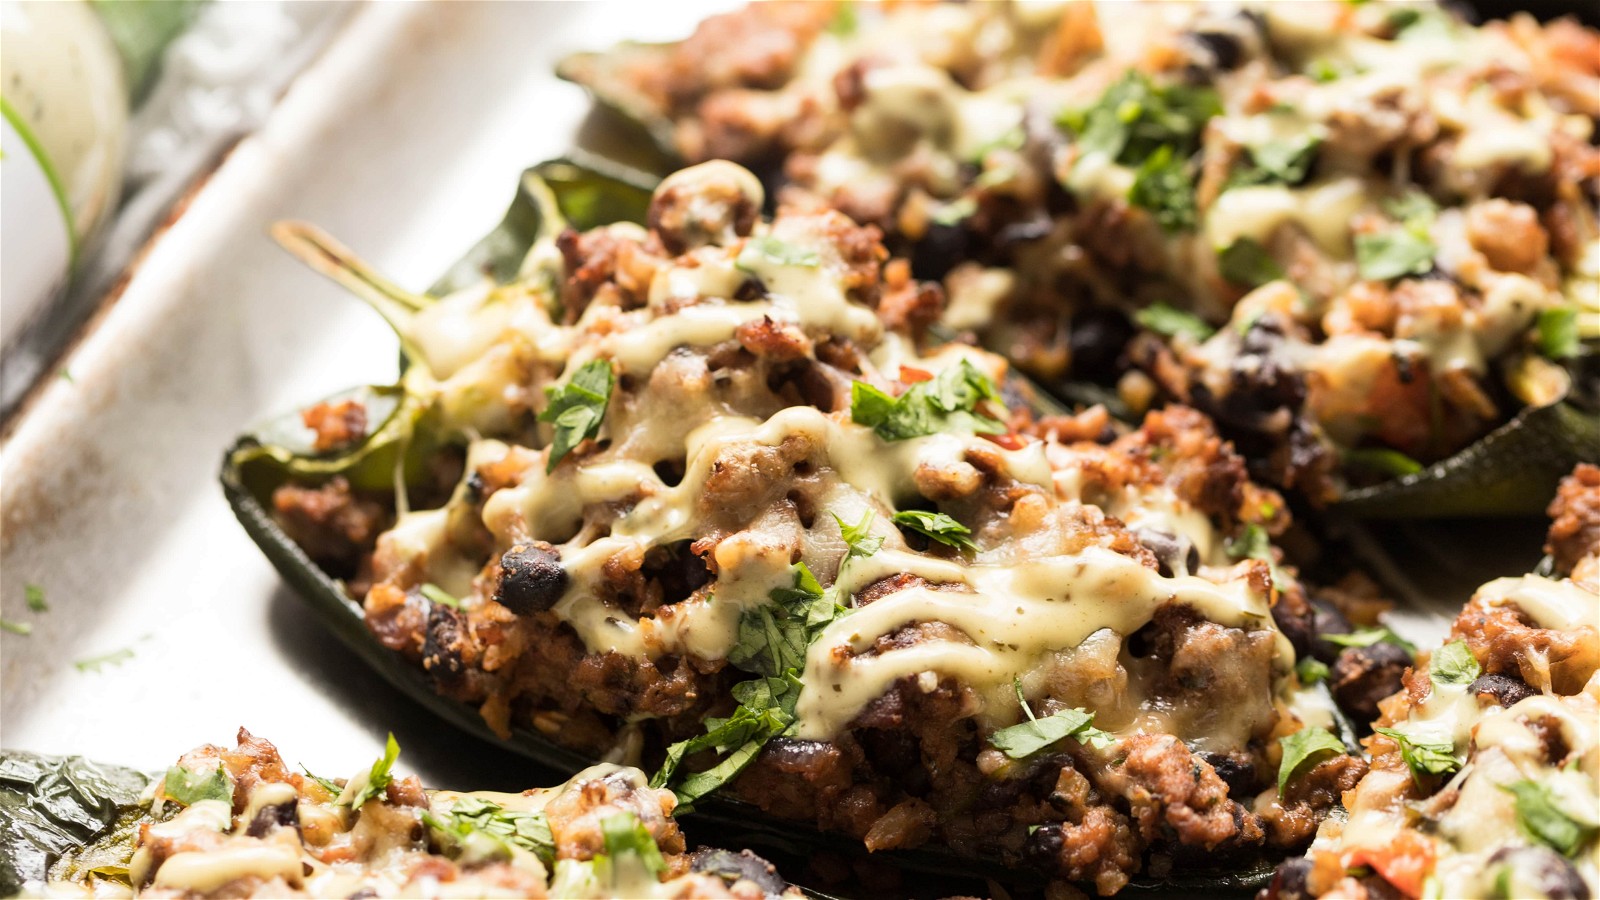 Image of Stuffed Poblano Peppers